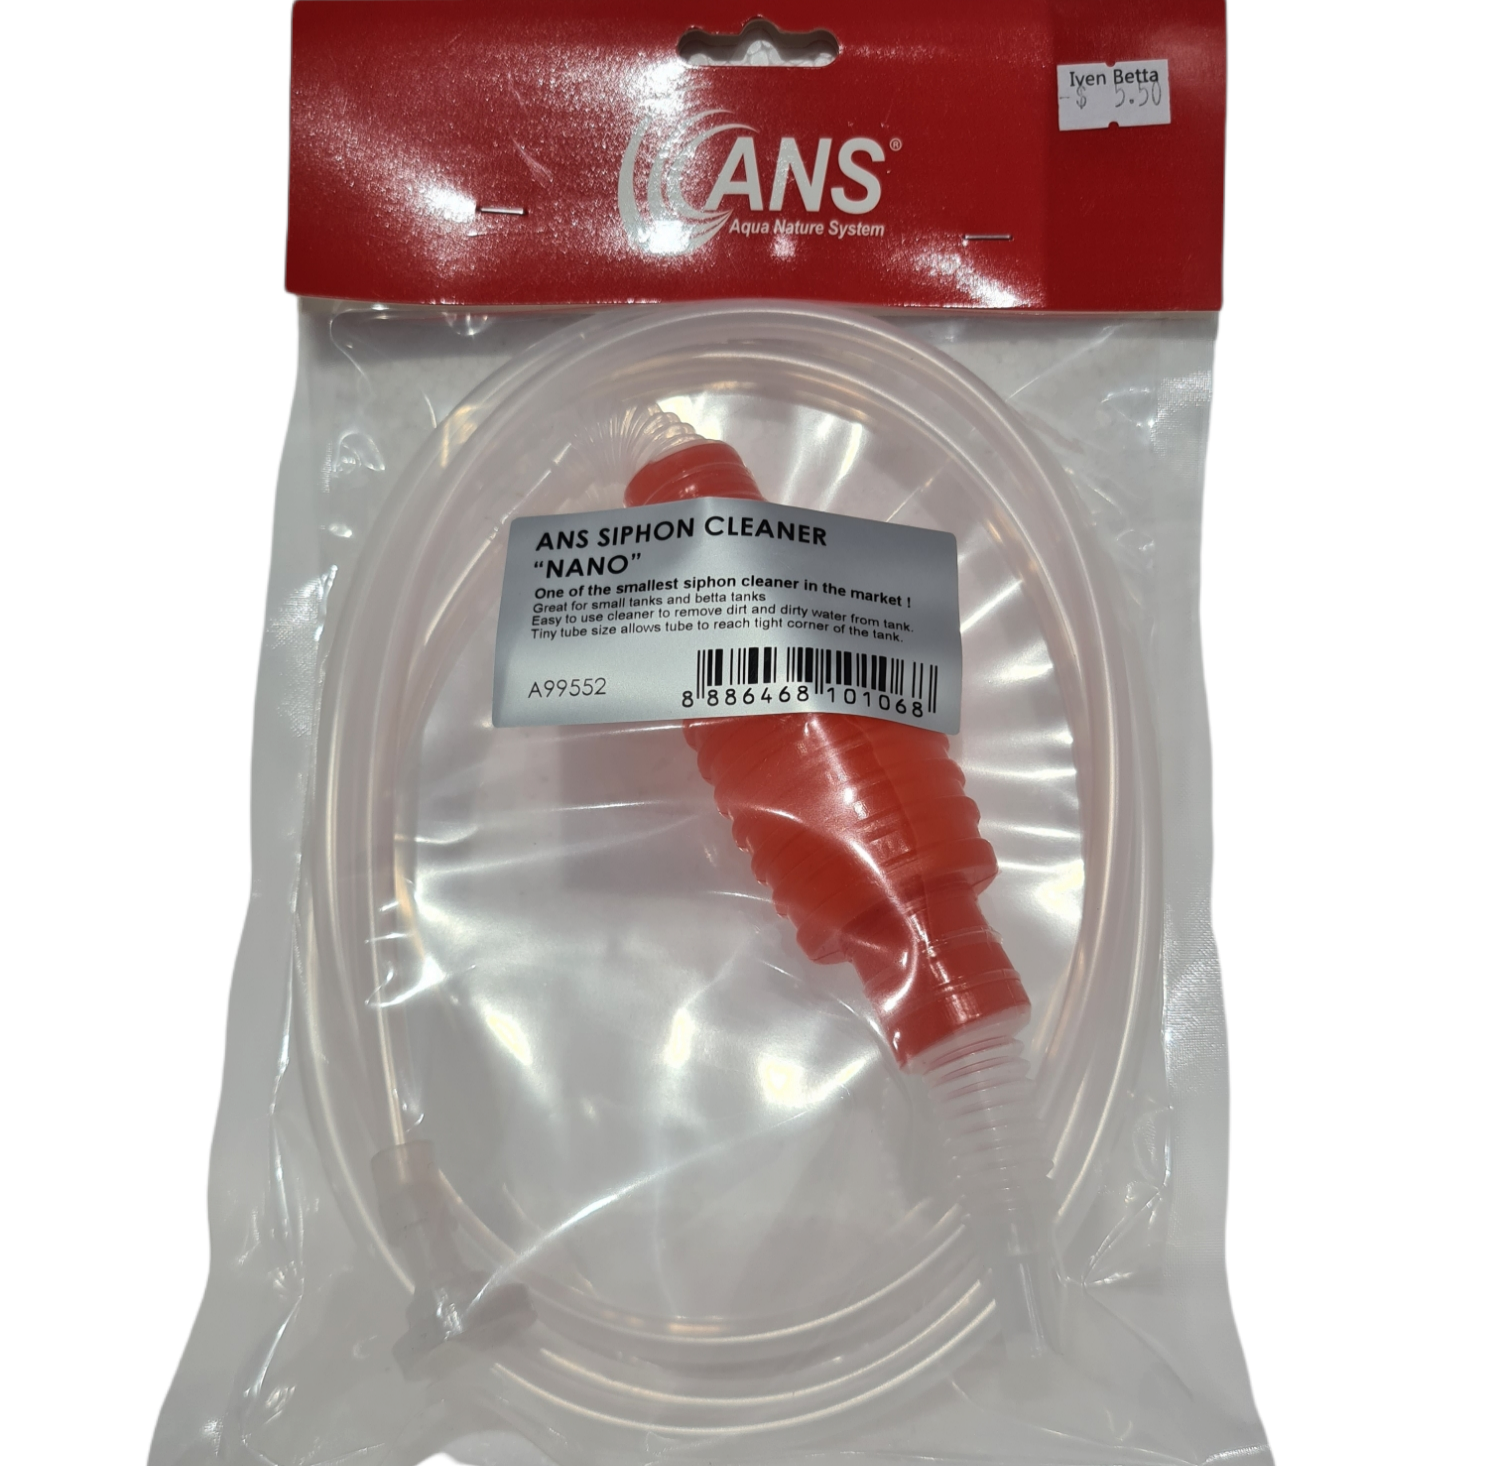 ANS Siphon Cleaner Nano